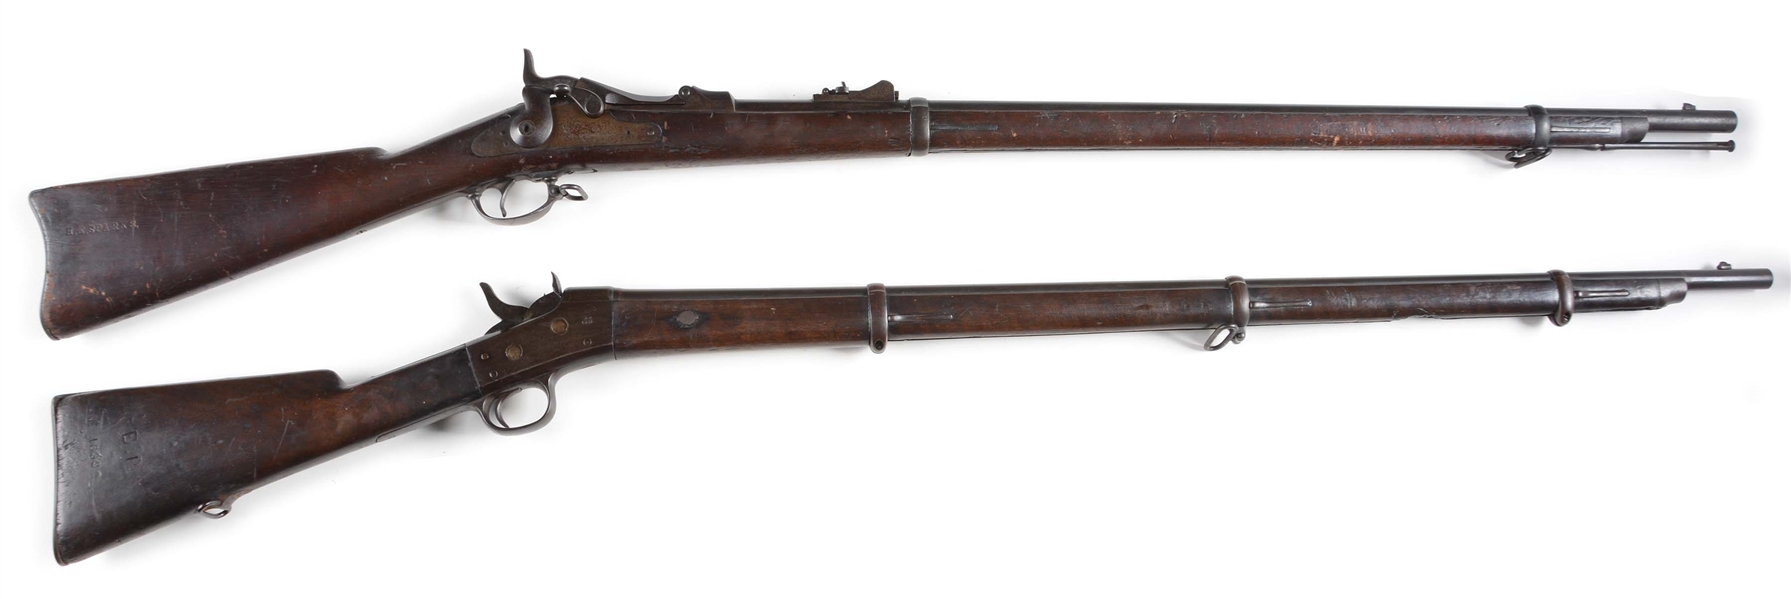 (A) LOT OF 2: 19TH CENTURY US SINGLE SHOT MILITARY RIFLES.